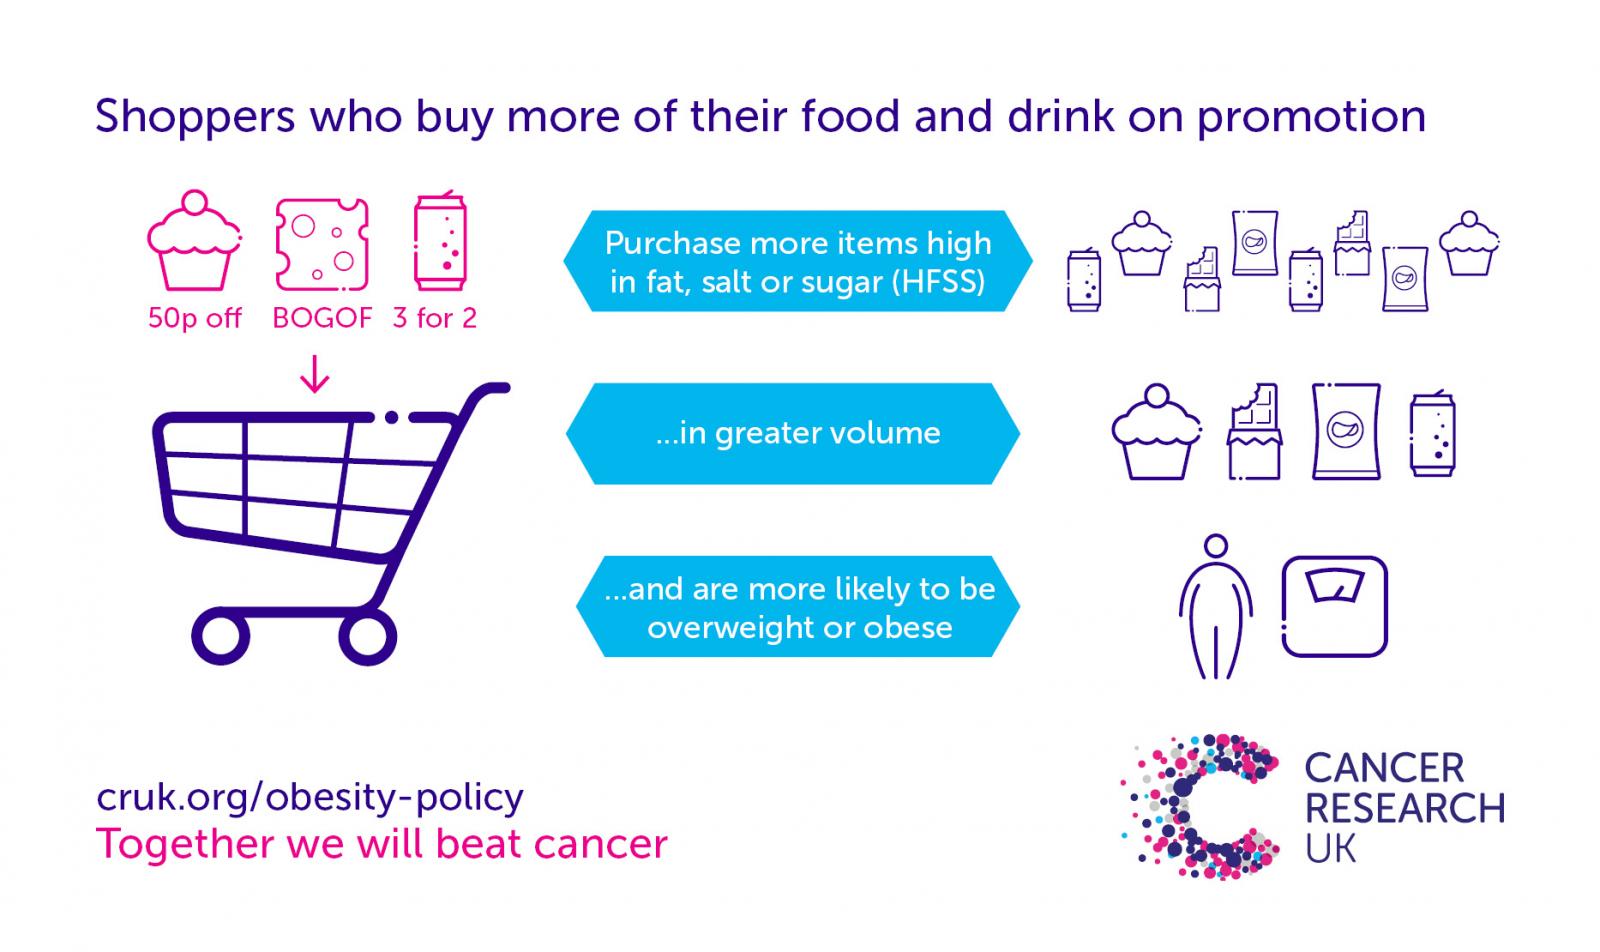 Copyright: Cancer Research UK